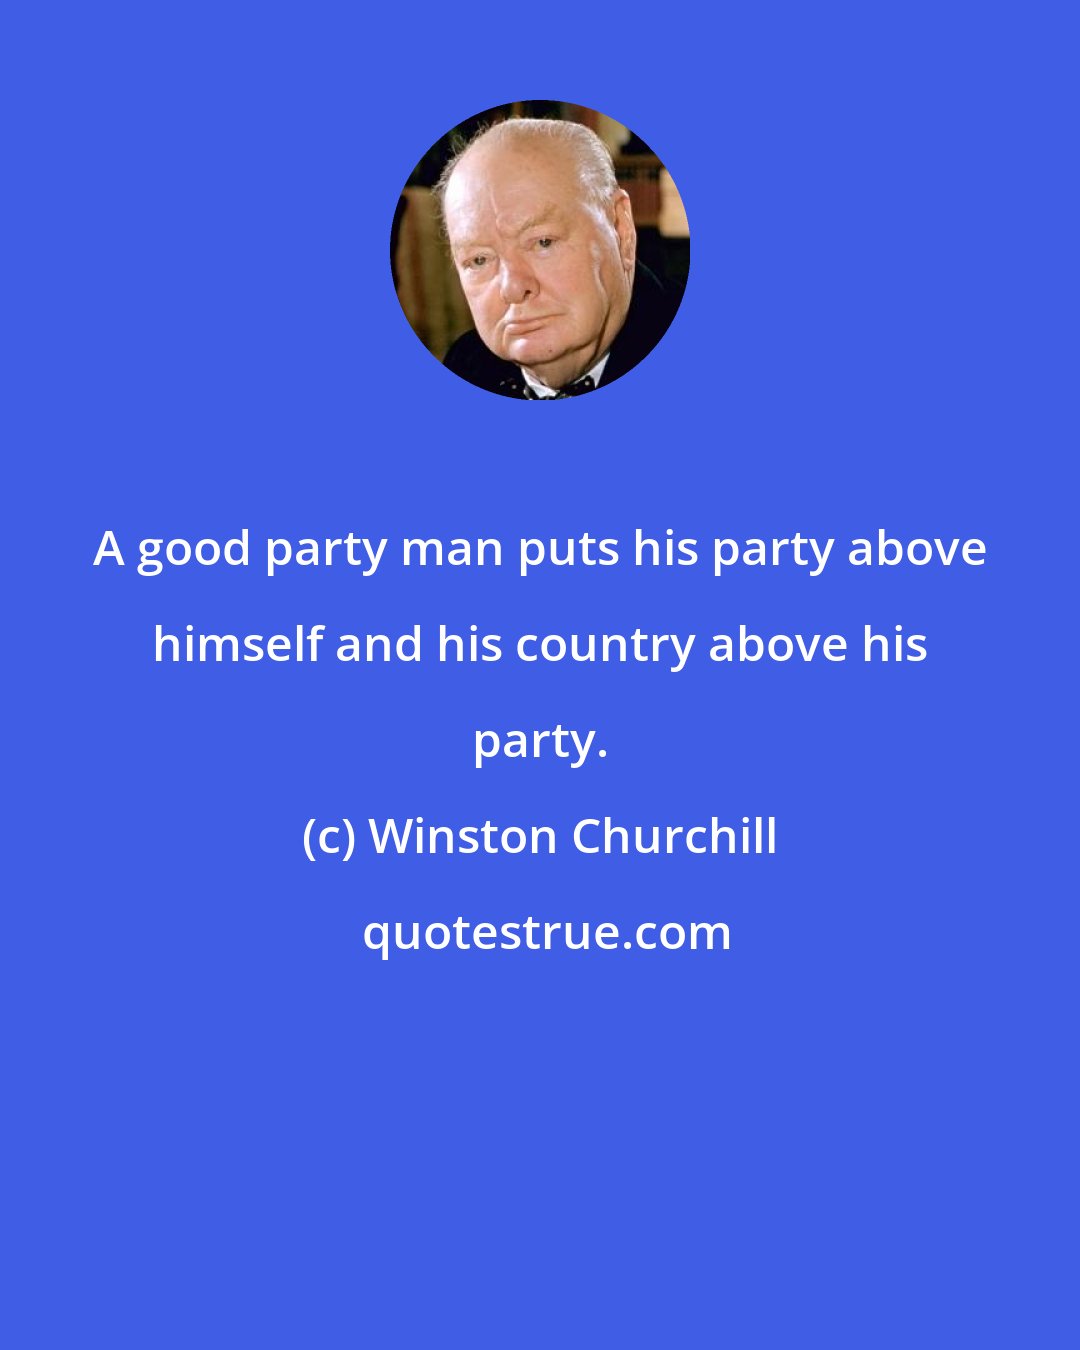 Winston Churchill: A good party man puts his party above himself and his country above his party.